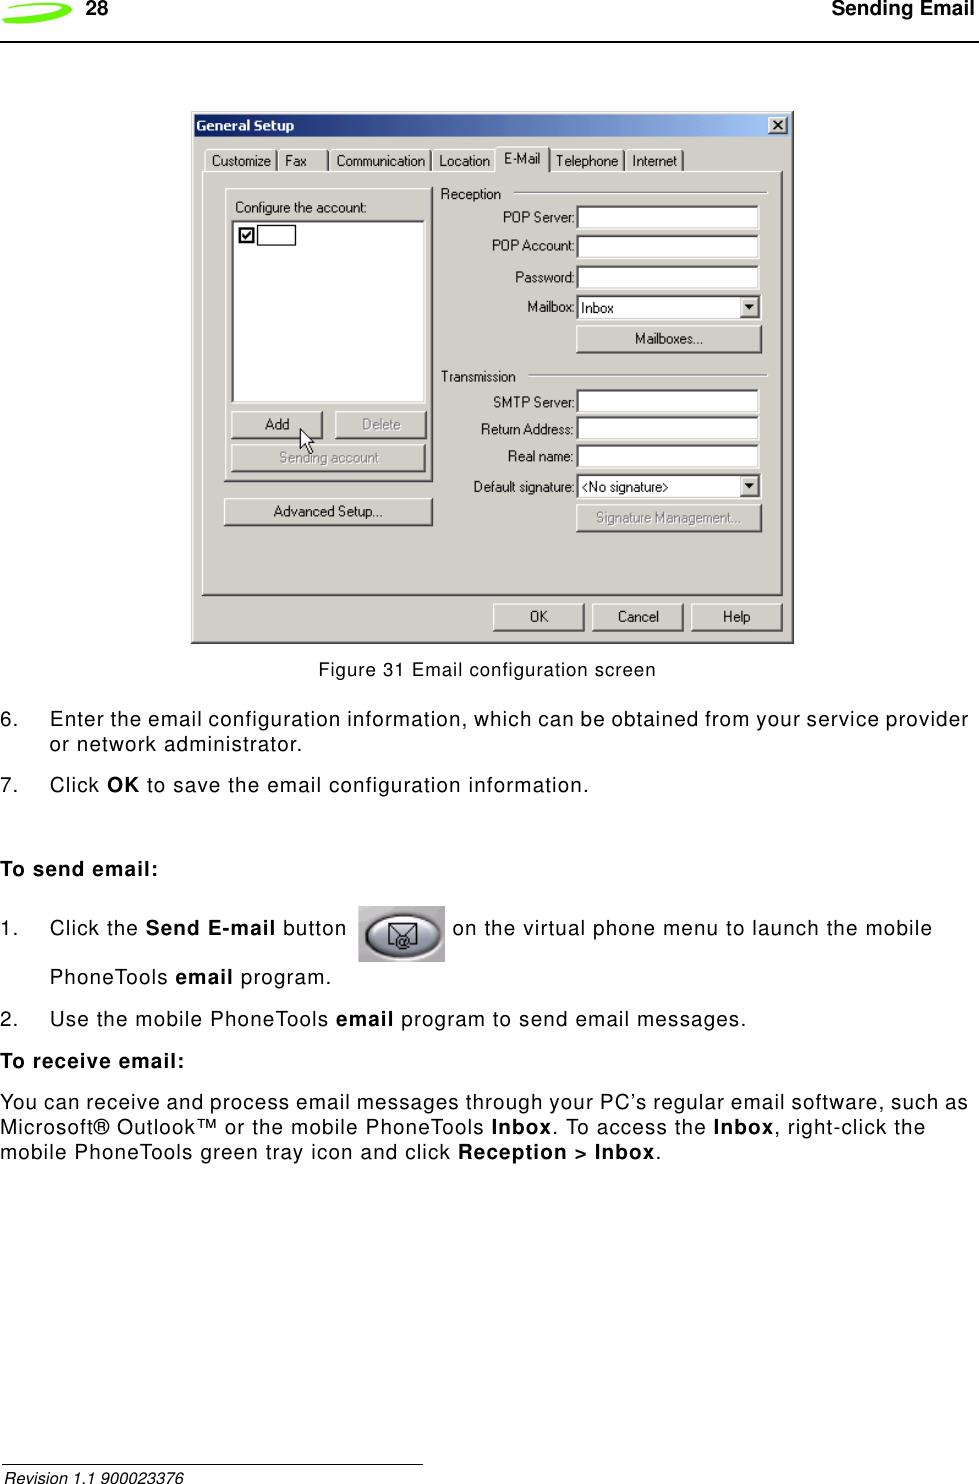 28  Sending Email Revision 1.1 900023376Figure 31 Email configuration screen6. Enter the email configuration information, which can be obtained from your service provider or network administrator.7. Click OK to save the email configuration information.To send email:1. Click the Send E-mail button   on the virtual phone menu to launch the mobile PhoneTools email program.2. Use the mobile PhoneTools email program to send email messages.To receive email:You can receive and process email messages through your PC’s regular email software, such as Microsoft® Outlook™ or the mobile PhoneTools Inbox. To access the Inbox, right-click the mobile PhoneTools green tray icon and click Reception &gt; Inbox.